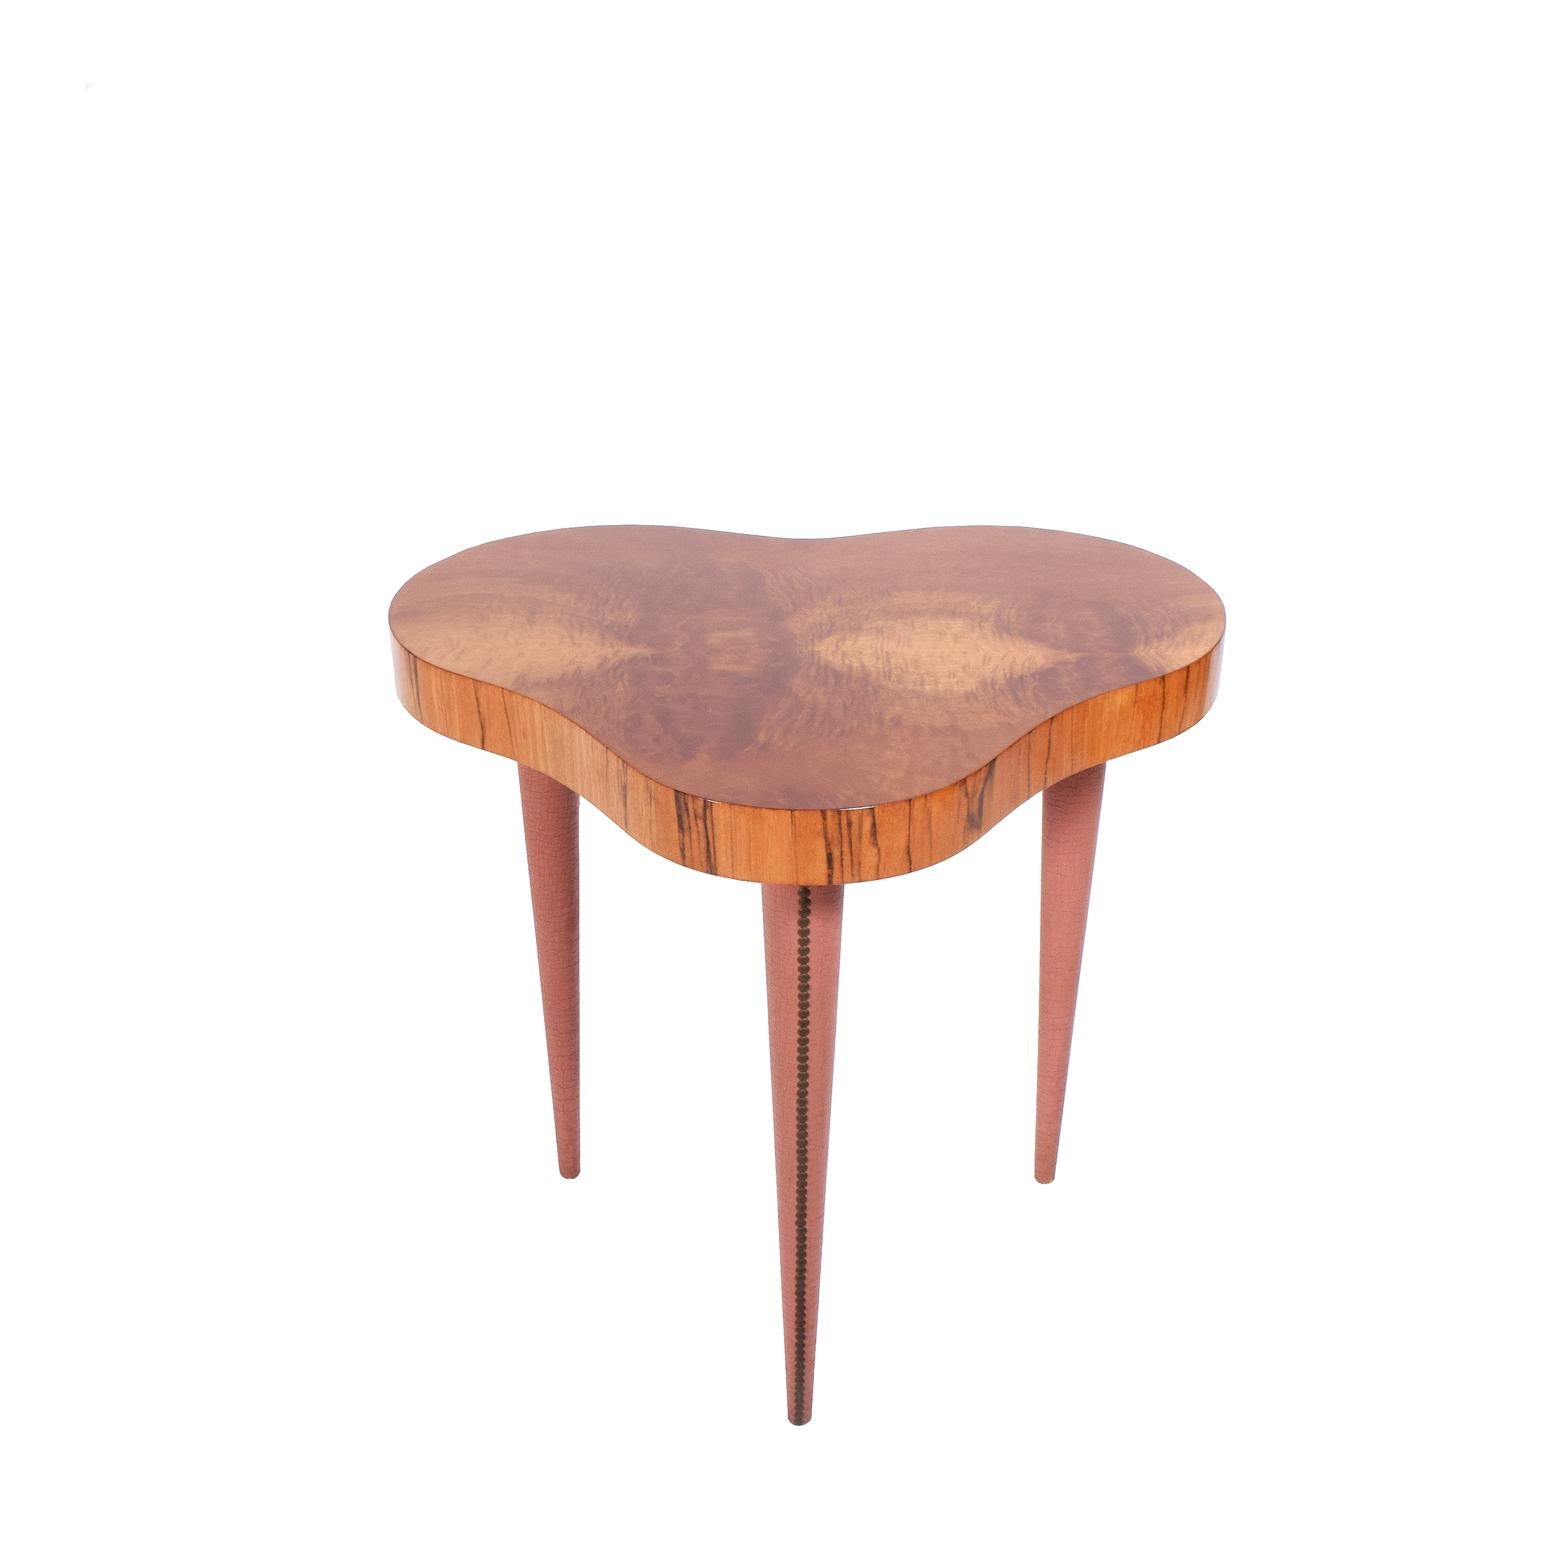 Rare table design by Gilbert Rohde from great Paldao Group series legs covered with original oil cloth with nail trim. Woods are Paldao edge and Acacia burl top on free form top. Design number 4187 stamp.